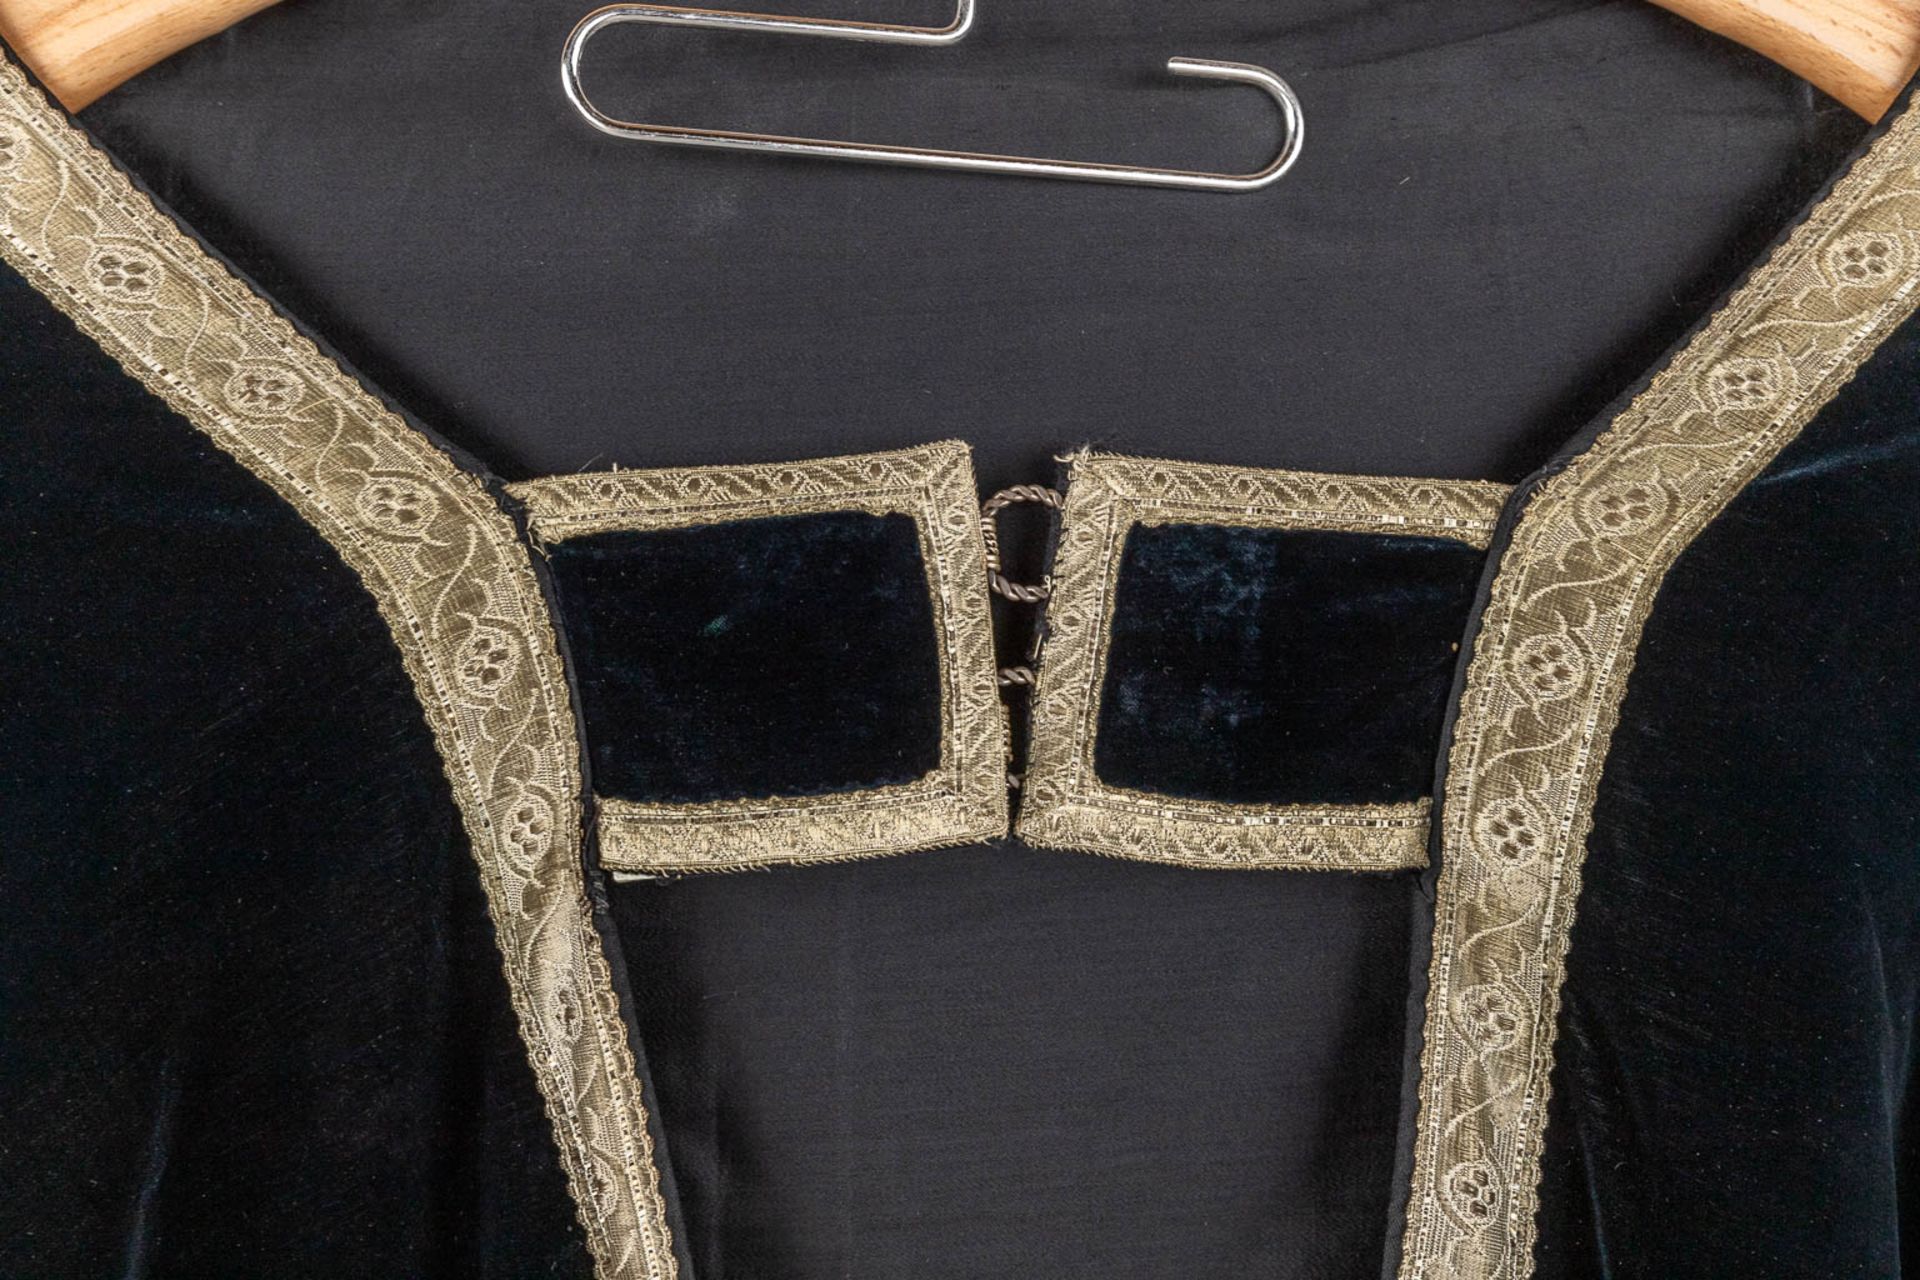 A Cope, Dalmatic, Stola, Maniple and Chalice Veil, Thick silver-thread embroideries. - Image 6 of 16